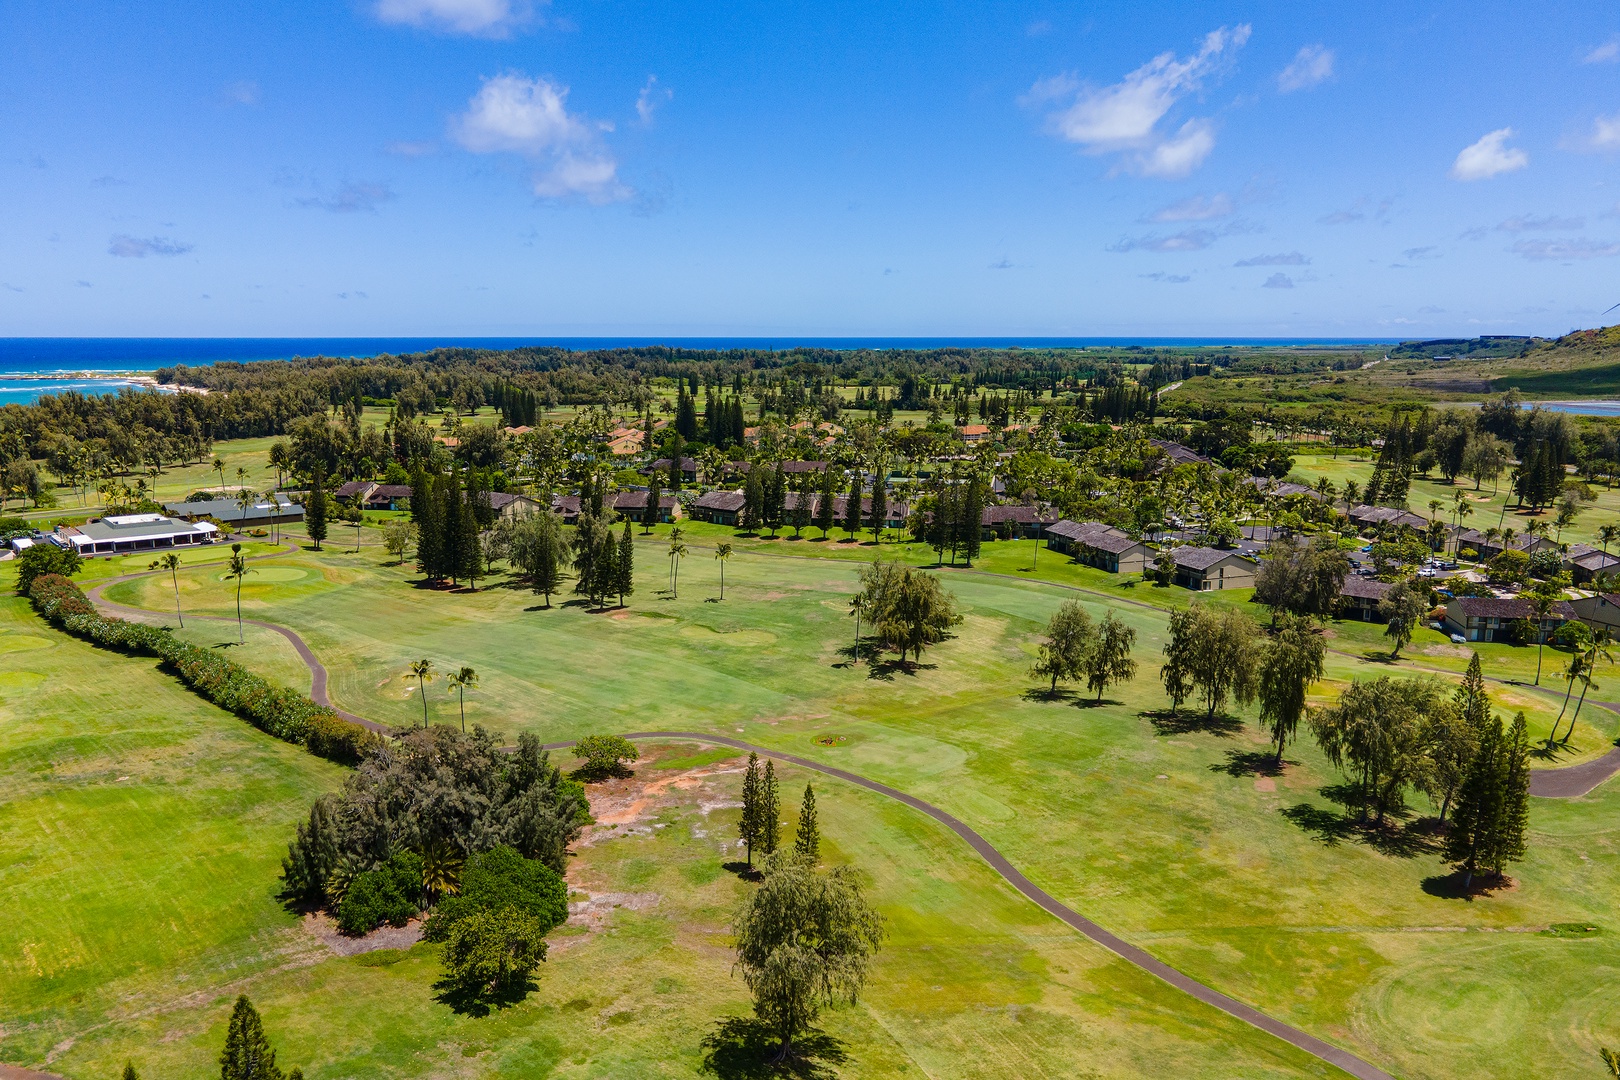 Kahuku Vacation Rentals, Kuilima Estates West #85 - Amazing World Class Golf Course in your backyard.